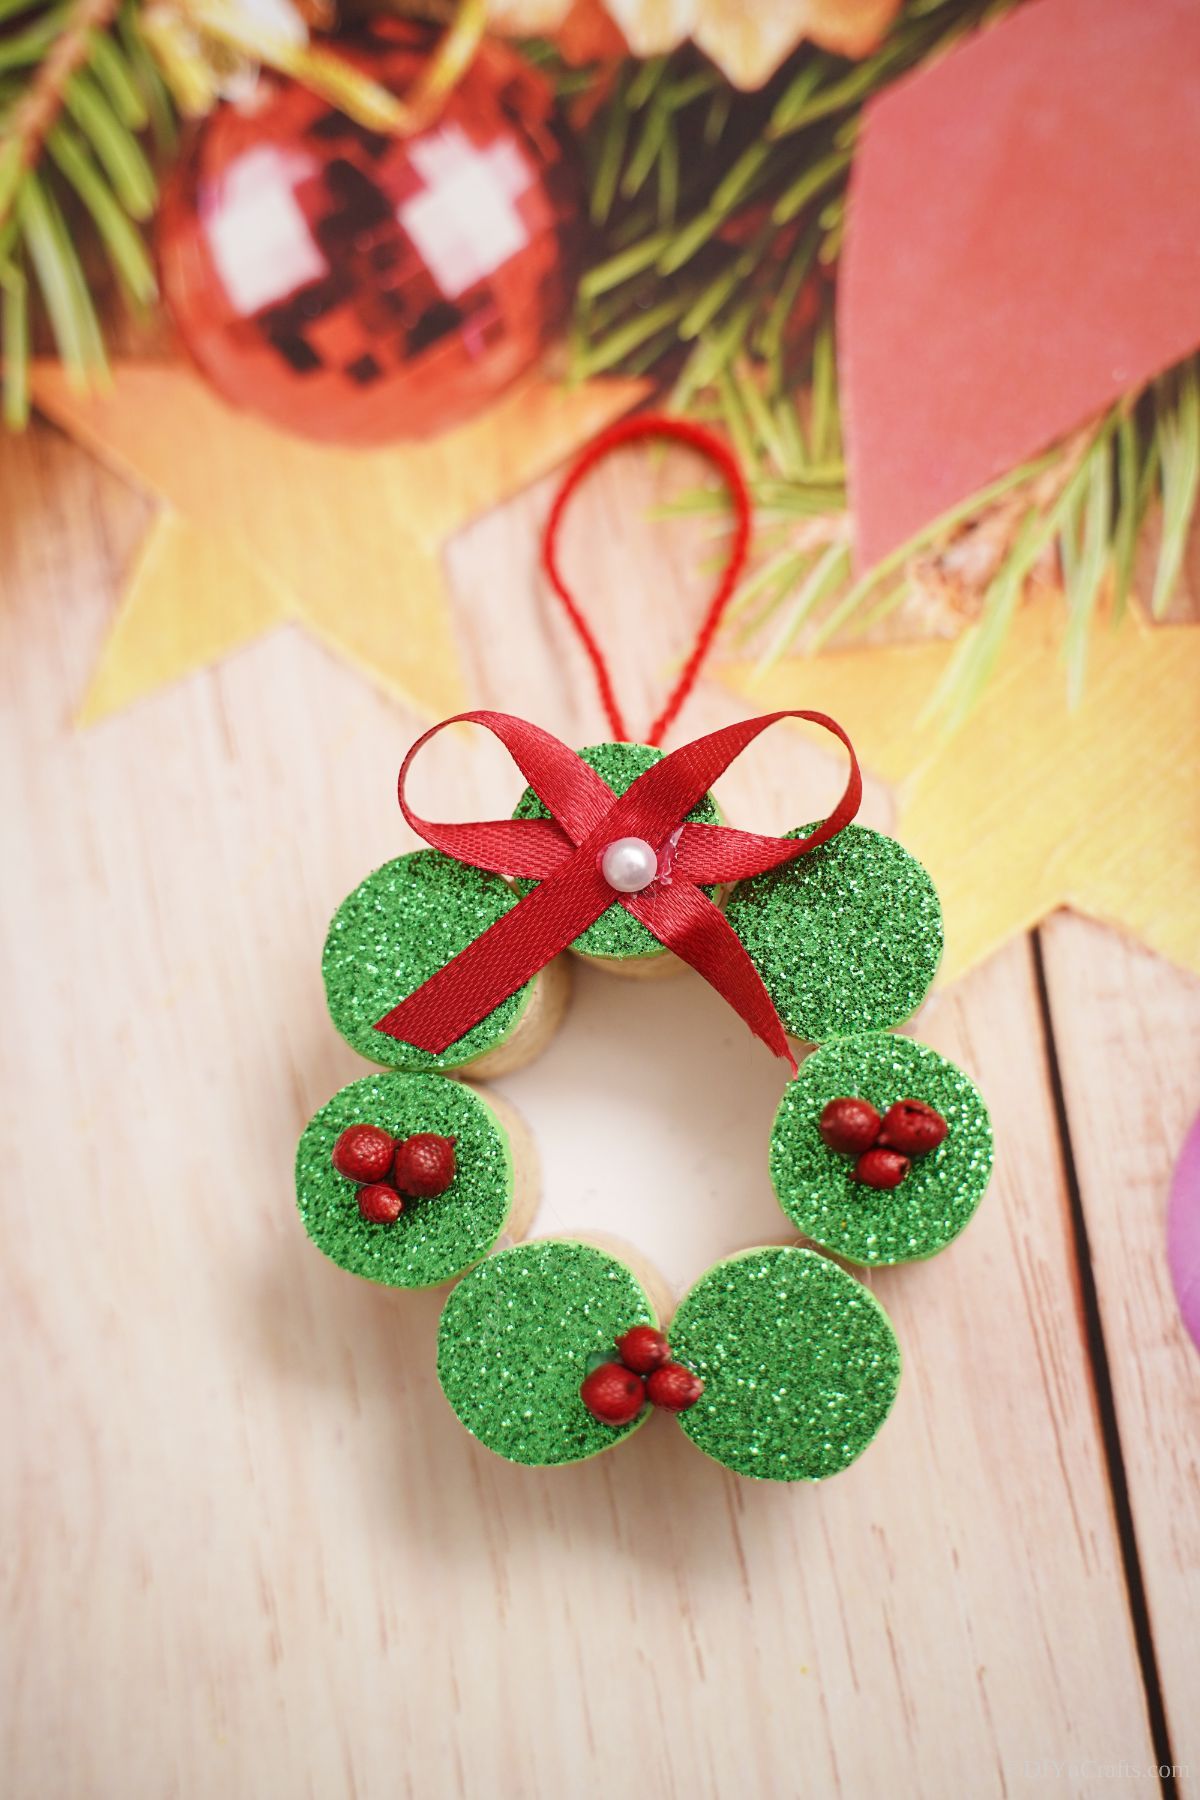 wine cork wreath ornament laying on holiday themed paper